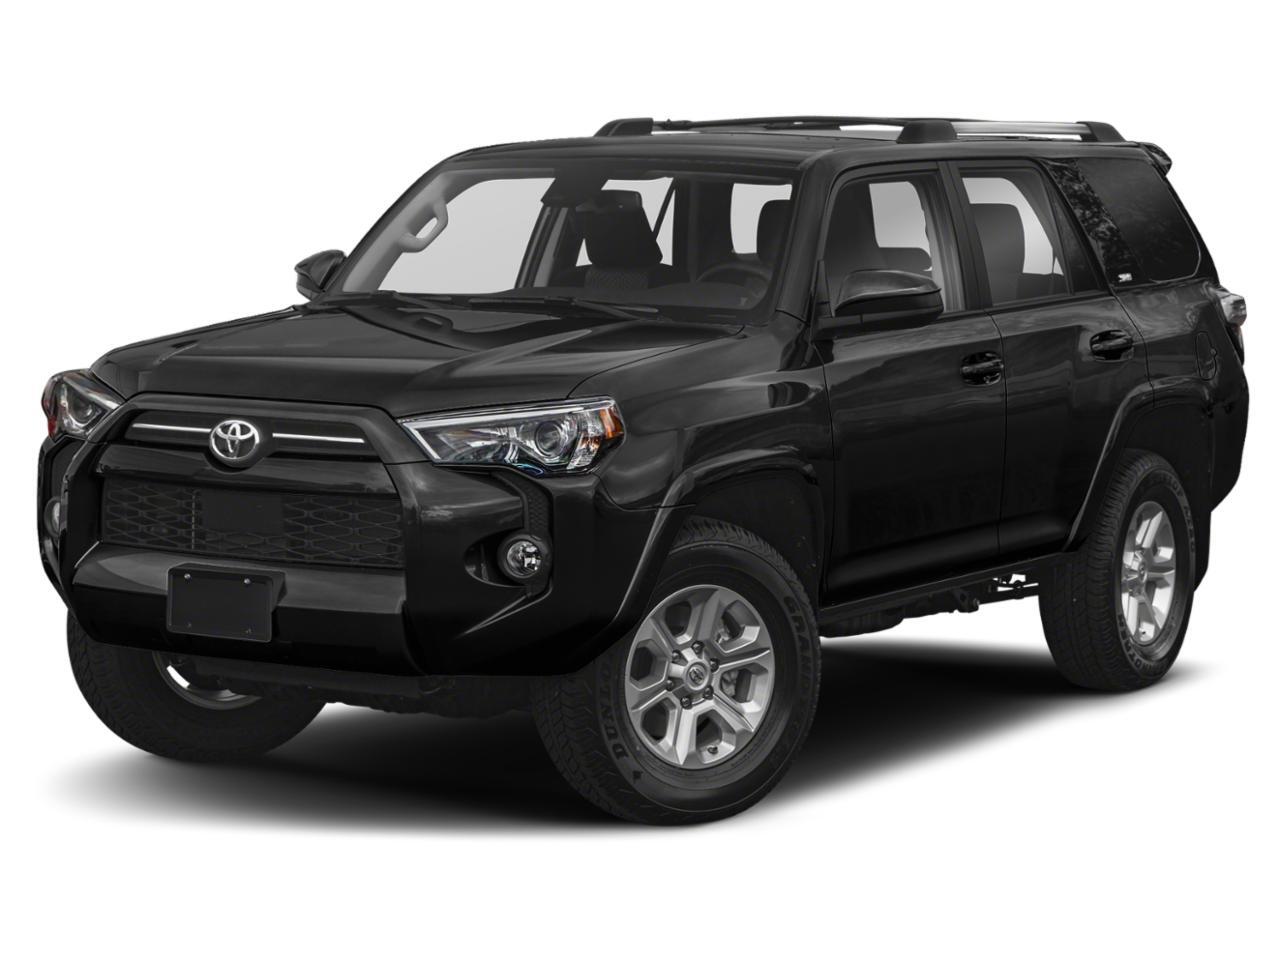 2021 Toyota 4Runner - 4WD | TOW HOOK | V6 | AUTOMATIC